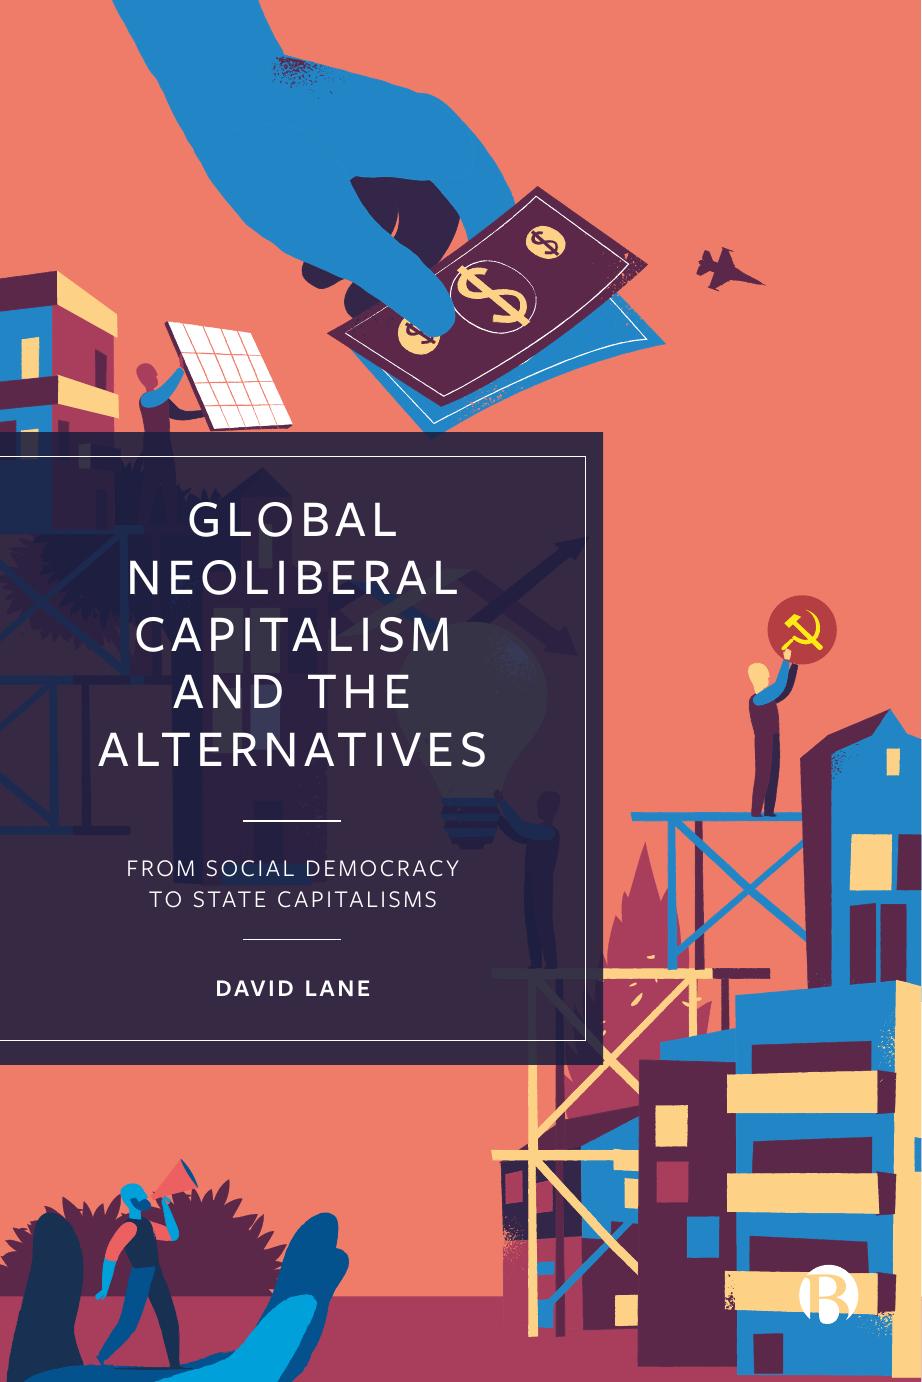 Global Neoliberal Capitalism and the Alternatives: From Social Democracy to State Capitalisms by David Lane